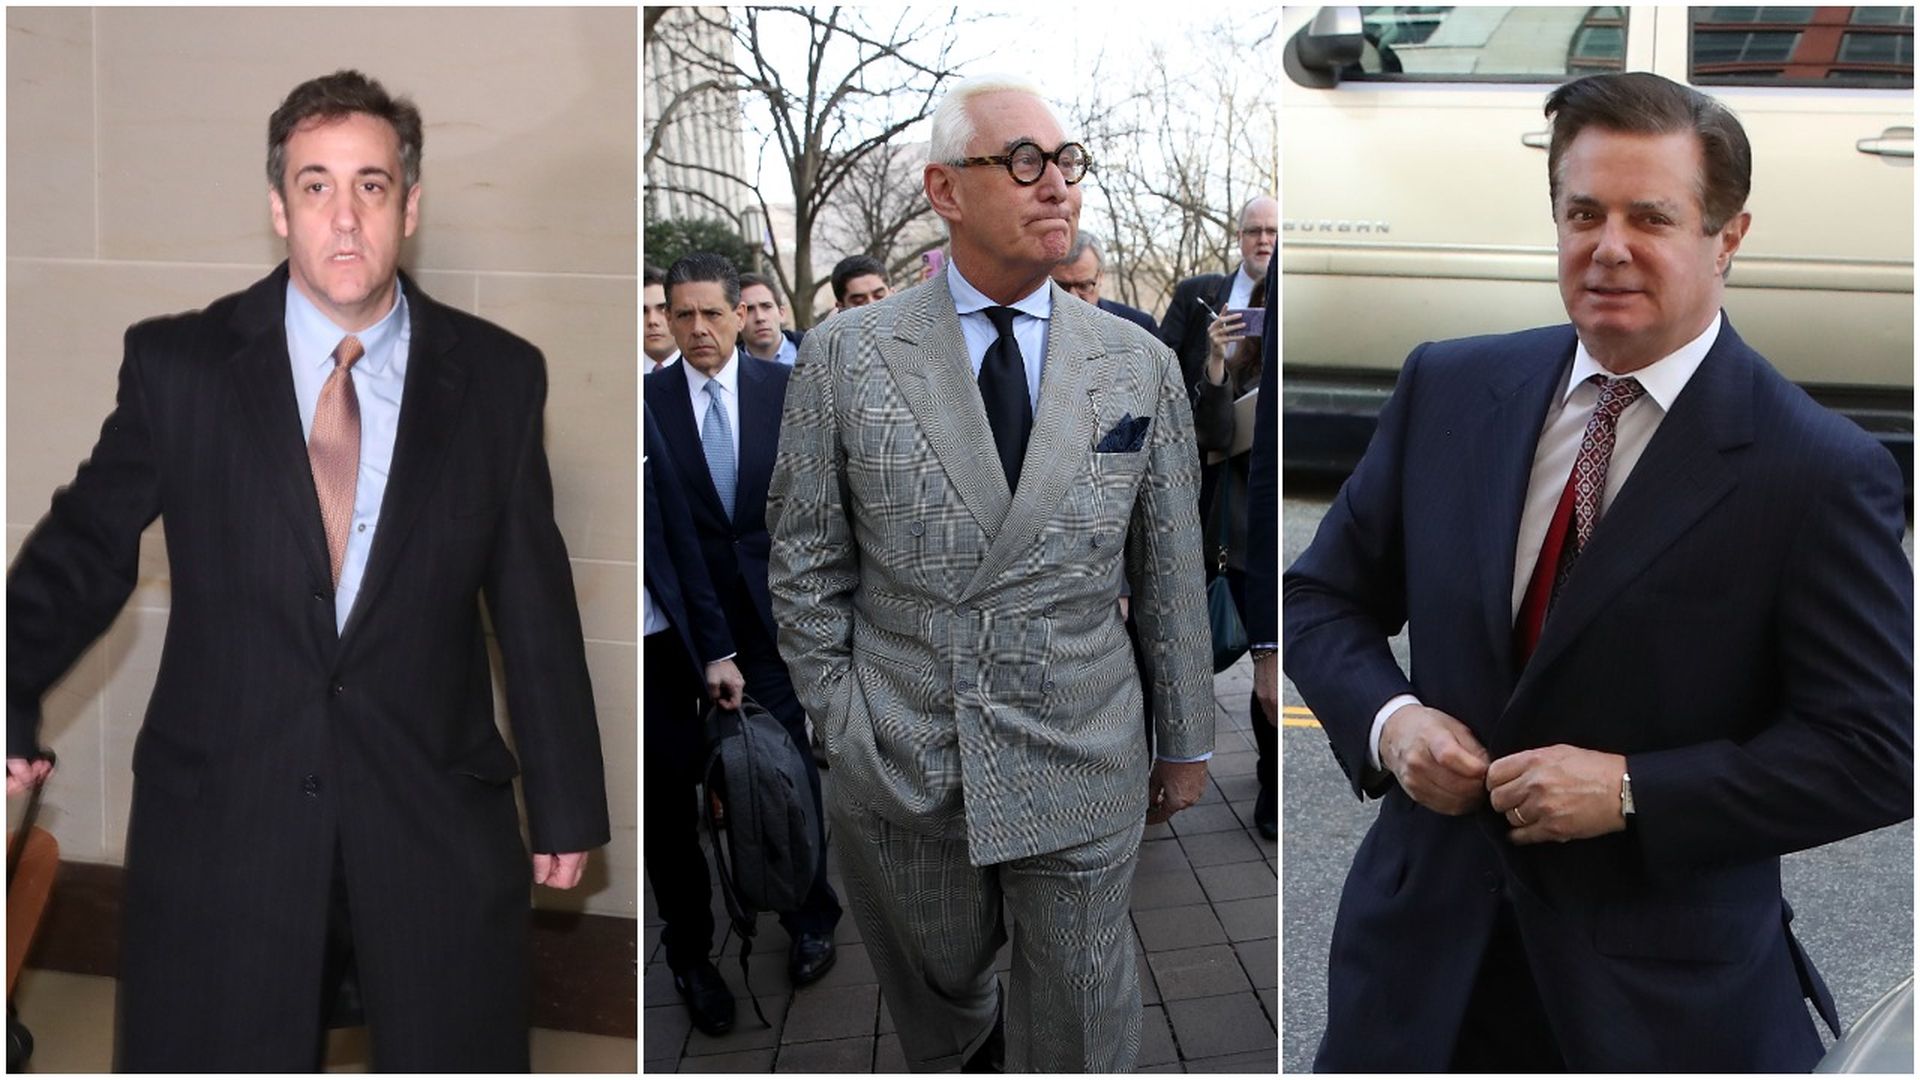 pic stitch of Michael Cohen, Roger Stone and Paul Manafort.